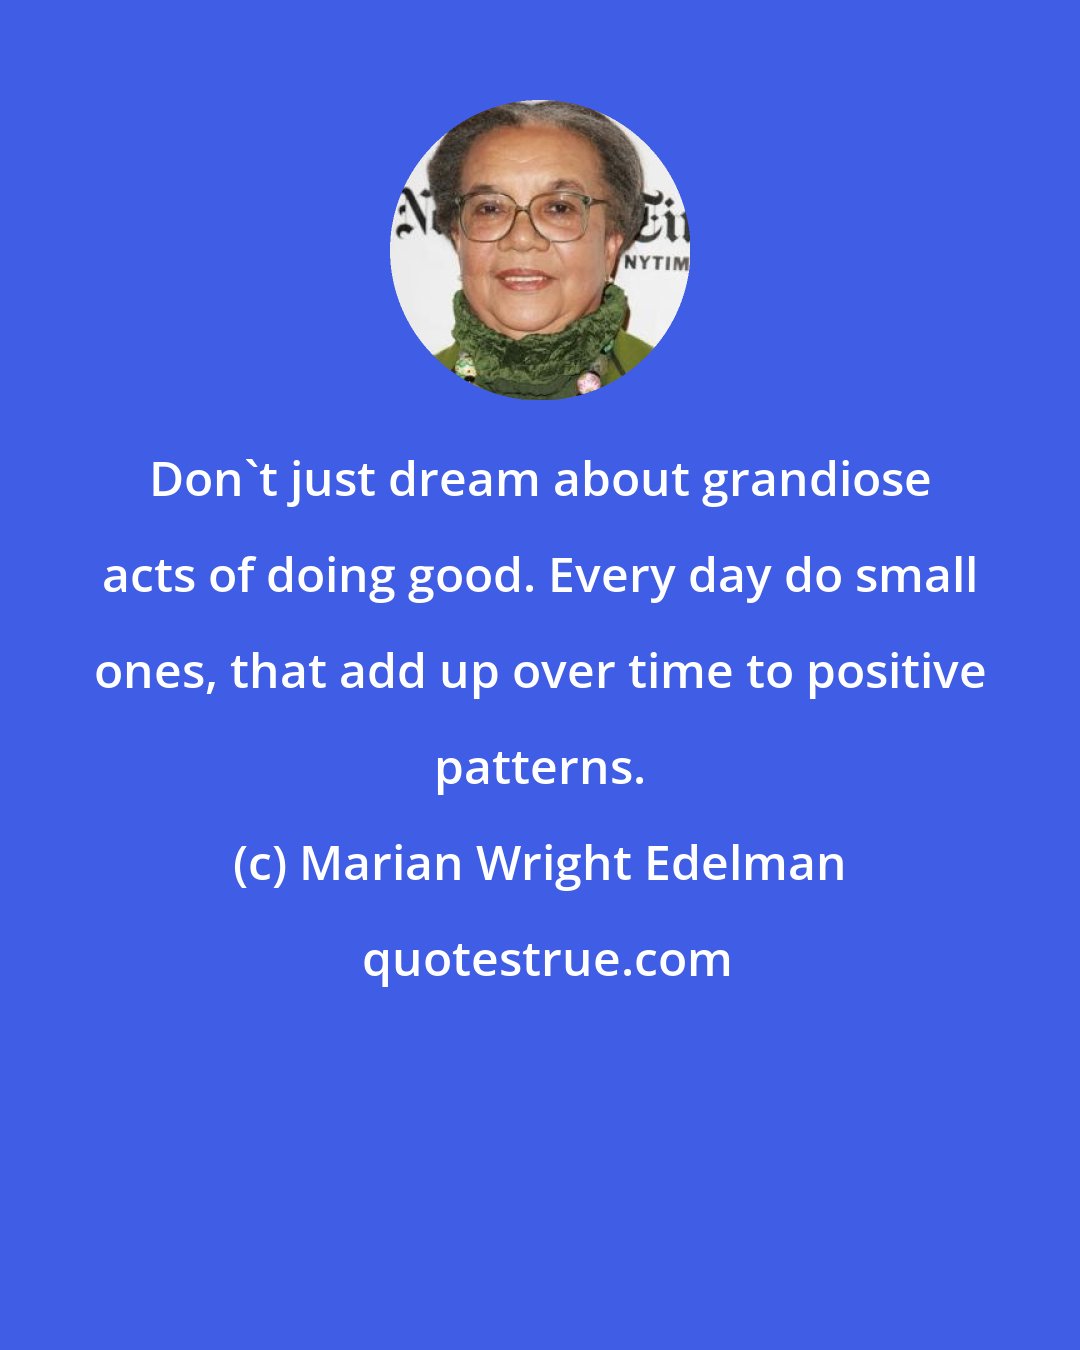 Marian Wright Edelman: Don't just dream about grandiose acts of doing good. Every day do small ones, that add up over time to positive patterns.